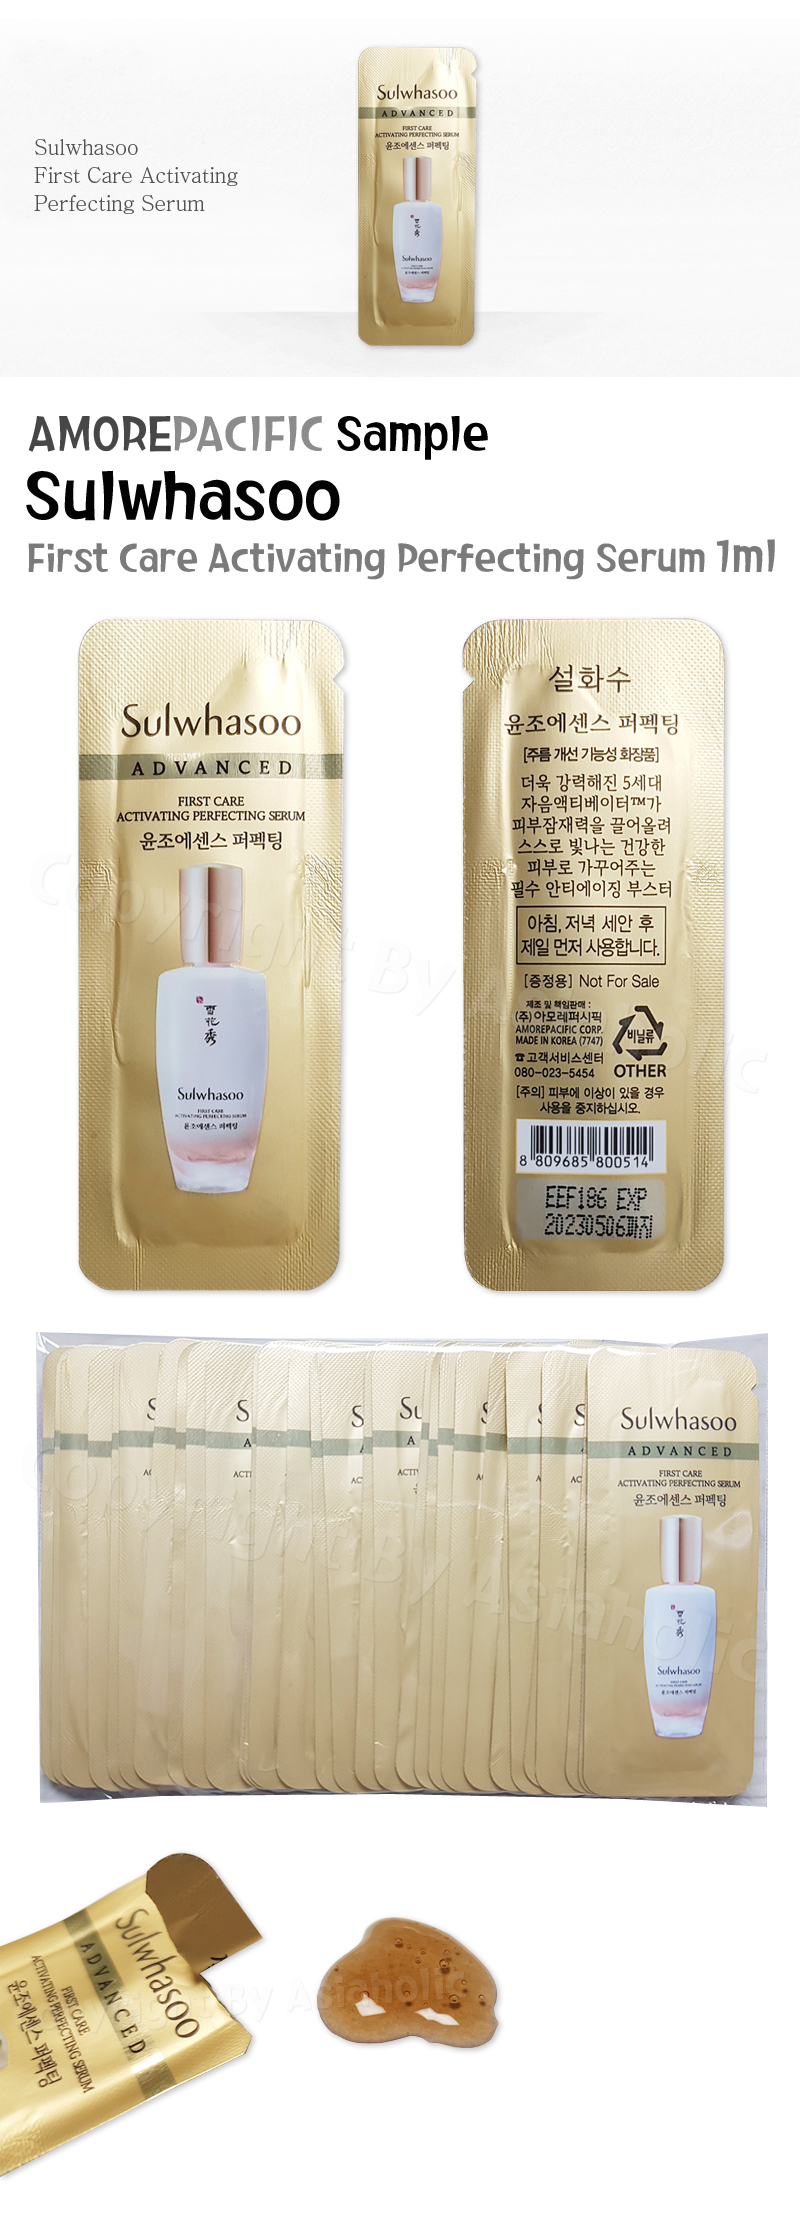 Sulwhasoo First Care Activating Perfecting Serum 1ml (10pcs ~ 150pcs) Newest Version